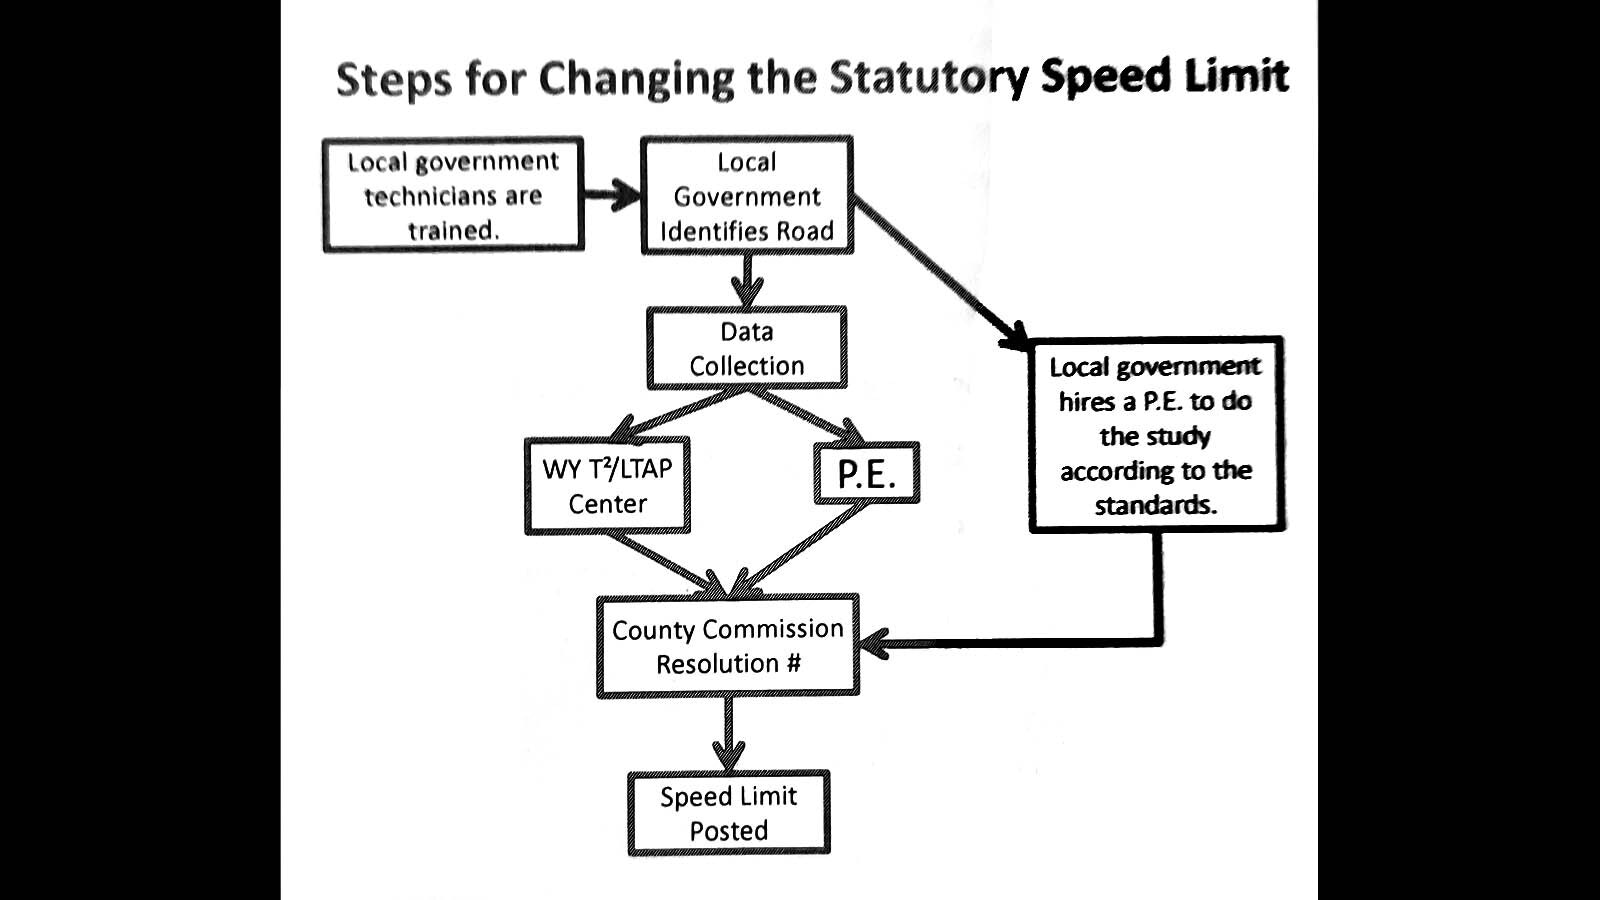 New standards were adopted by the state legislature in 2011 that required counties to collect data and conduct a road study signed by an engineer before making speed or other changes to county roads.